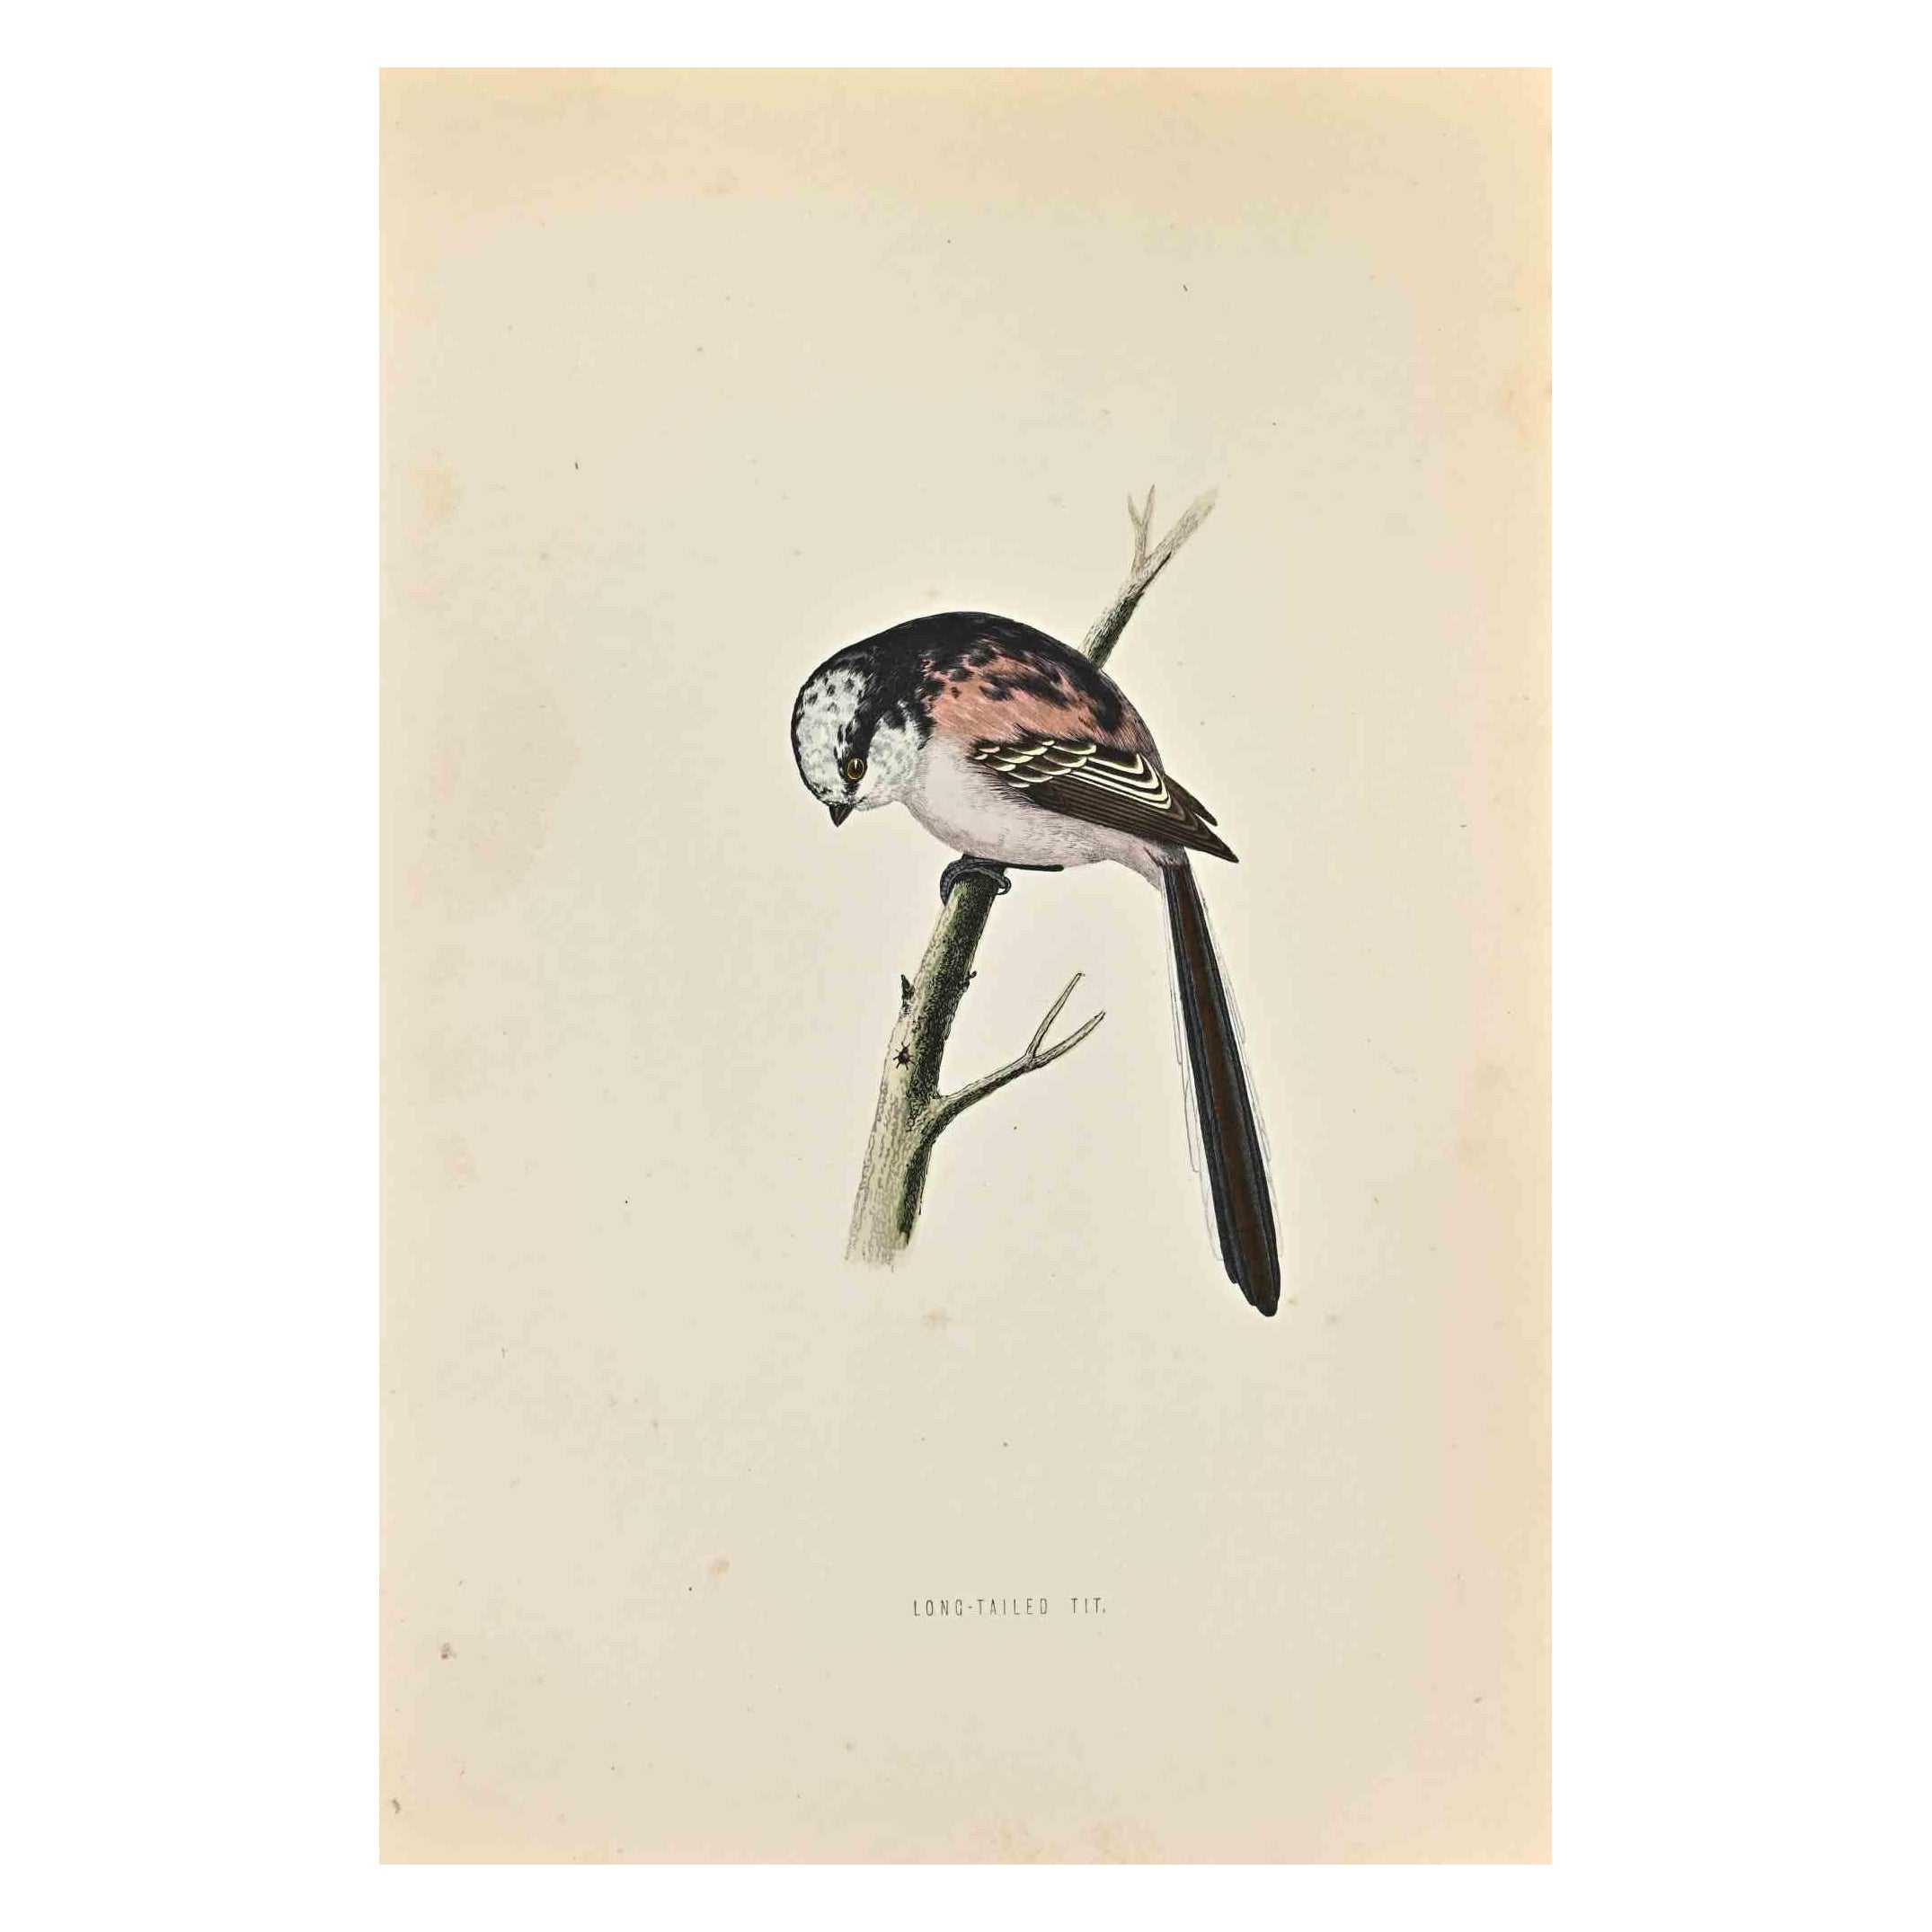 Long-Tailed Tit is a modern artwork realized in 1870 by the British artist Alexander Francis Lydon (1836-1917).

Woodcut print on ivory-colored paper.

Hand-colored, published by London, Bell & Sons, 1870.  

The name of the bird is printed on the